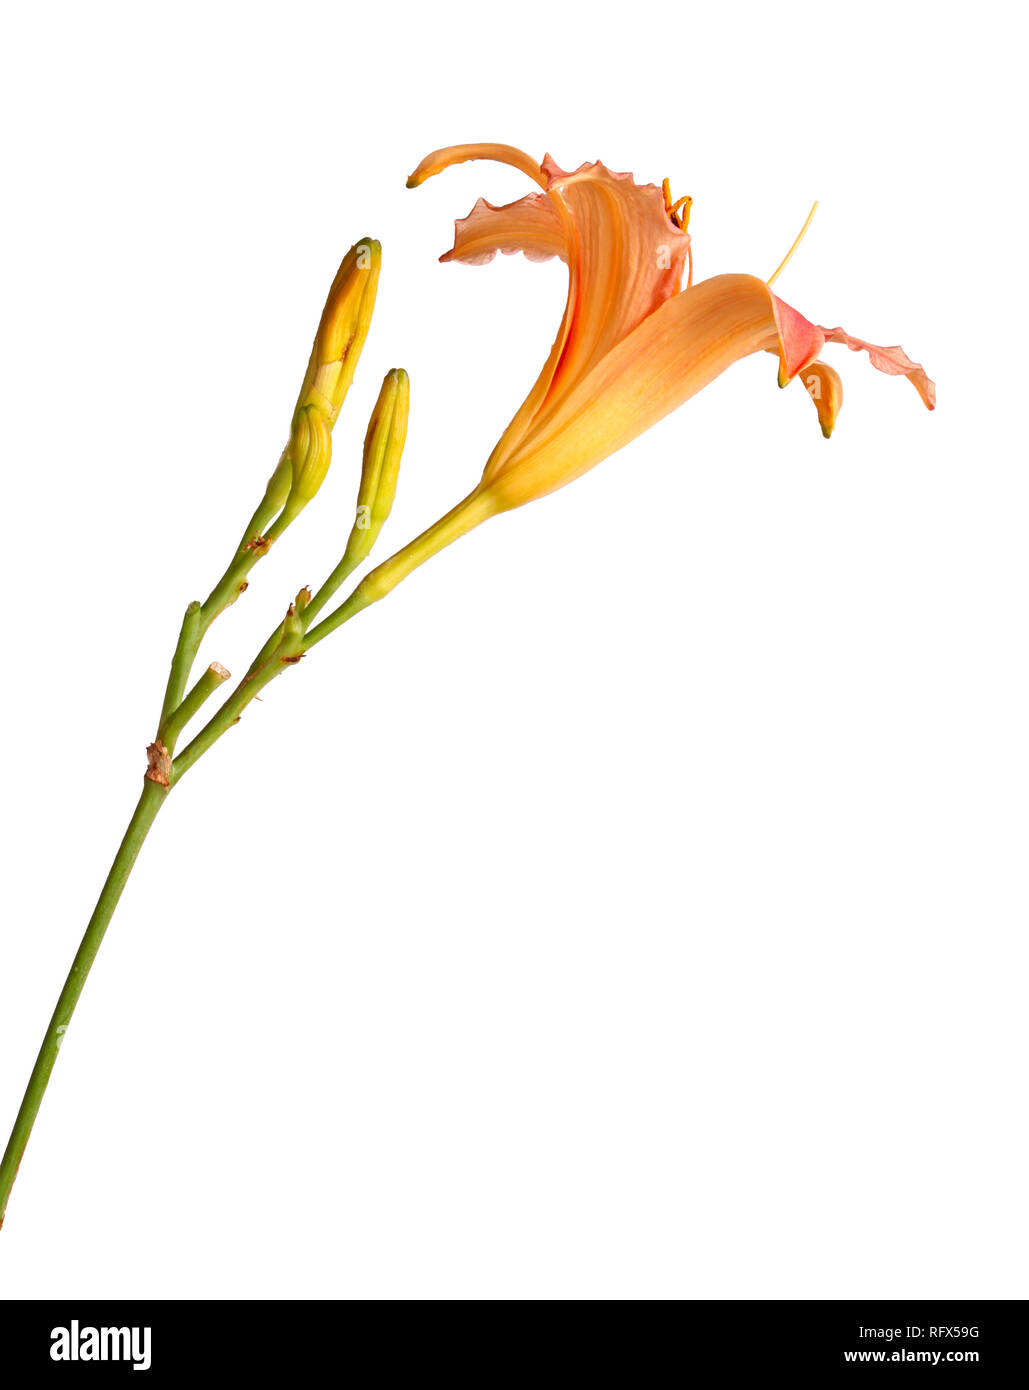 Side view of a single stem with a pink and yellow daylily flower (Hemerocallis hybrid) plus unopened buds isolated against a white background Stock Photo